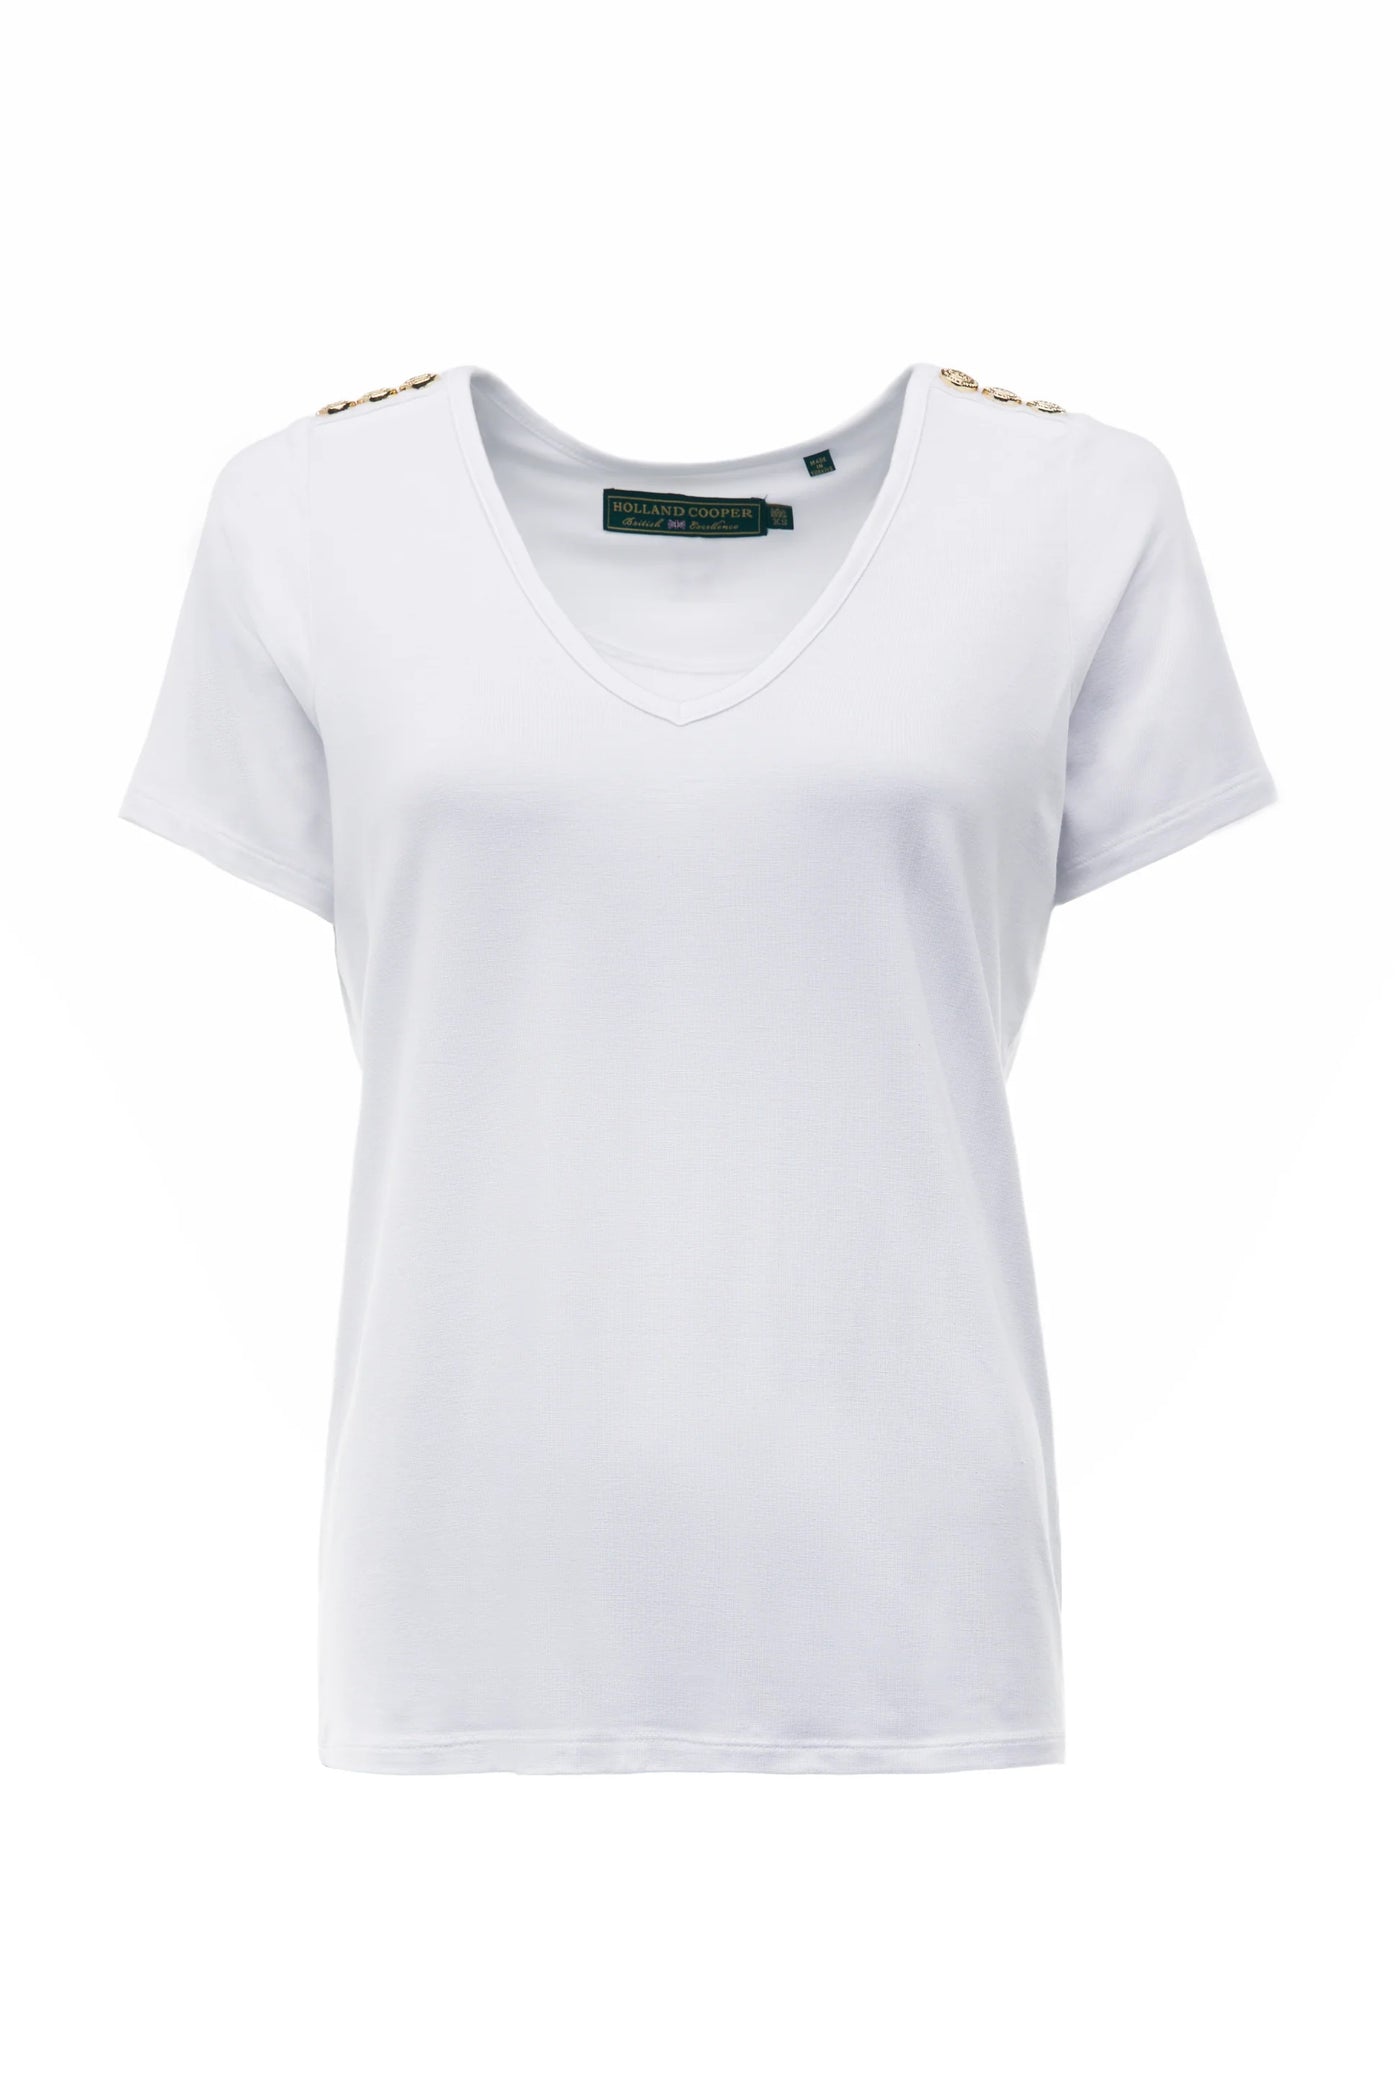 Holland Cooper Relax Fit V Neck Tee in White Front